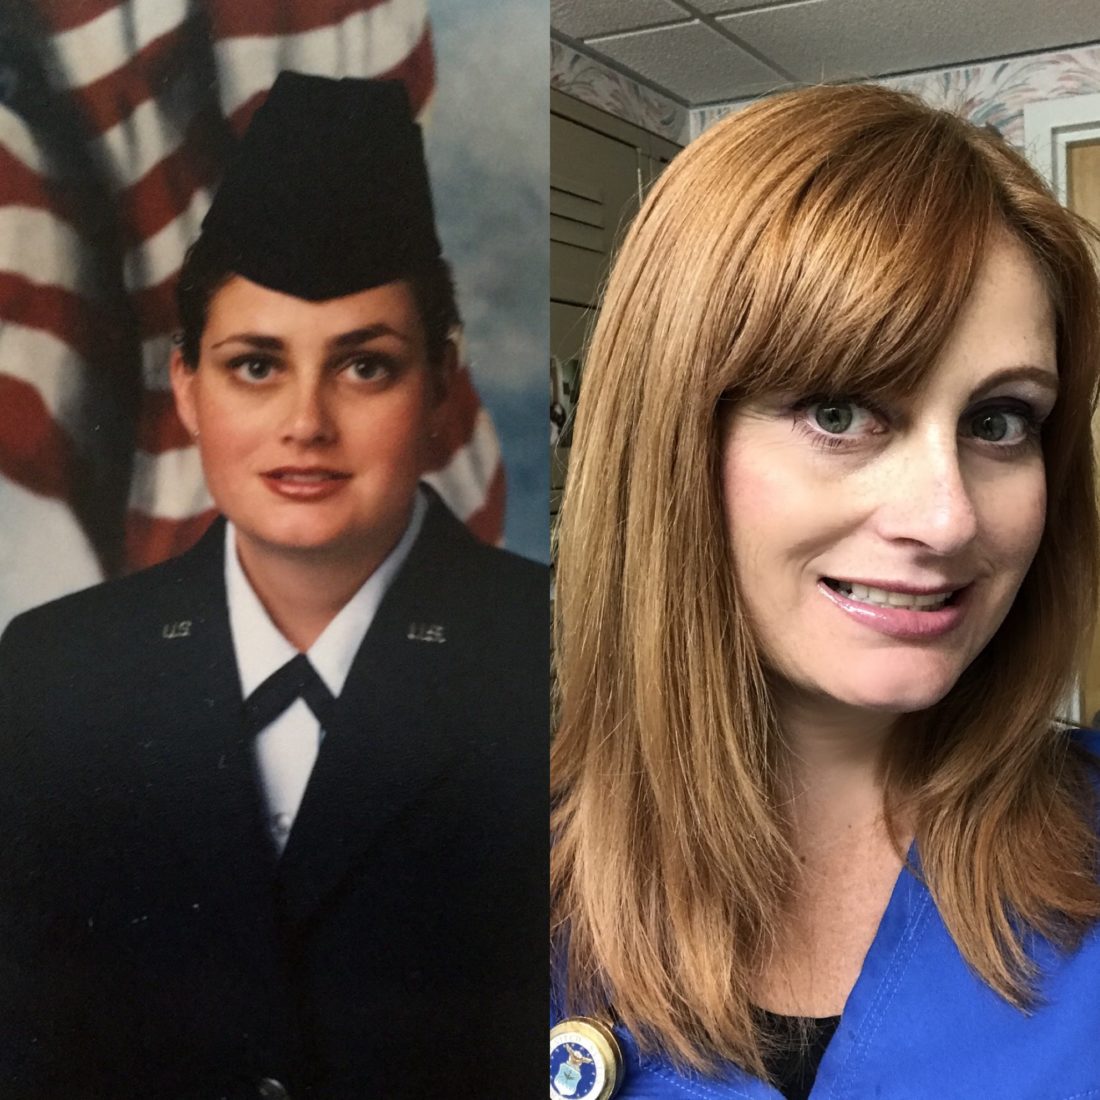 On left, woman wearing U.S. Air Force uniform, and on right, same woman wearing scrubs